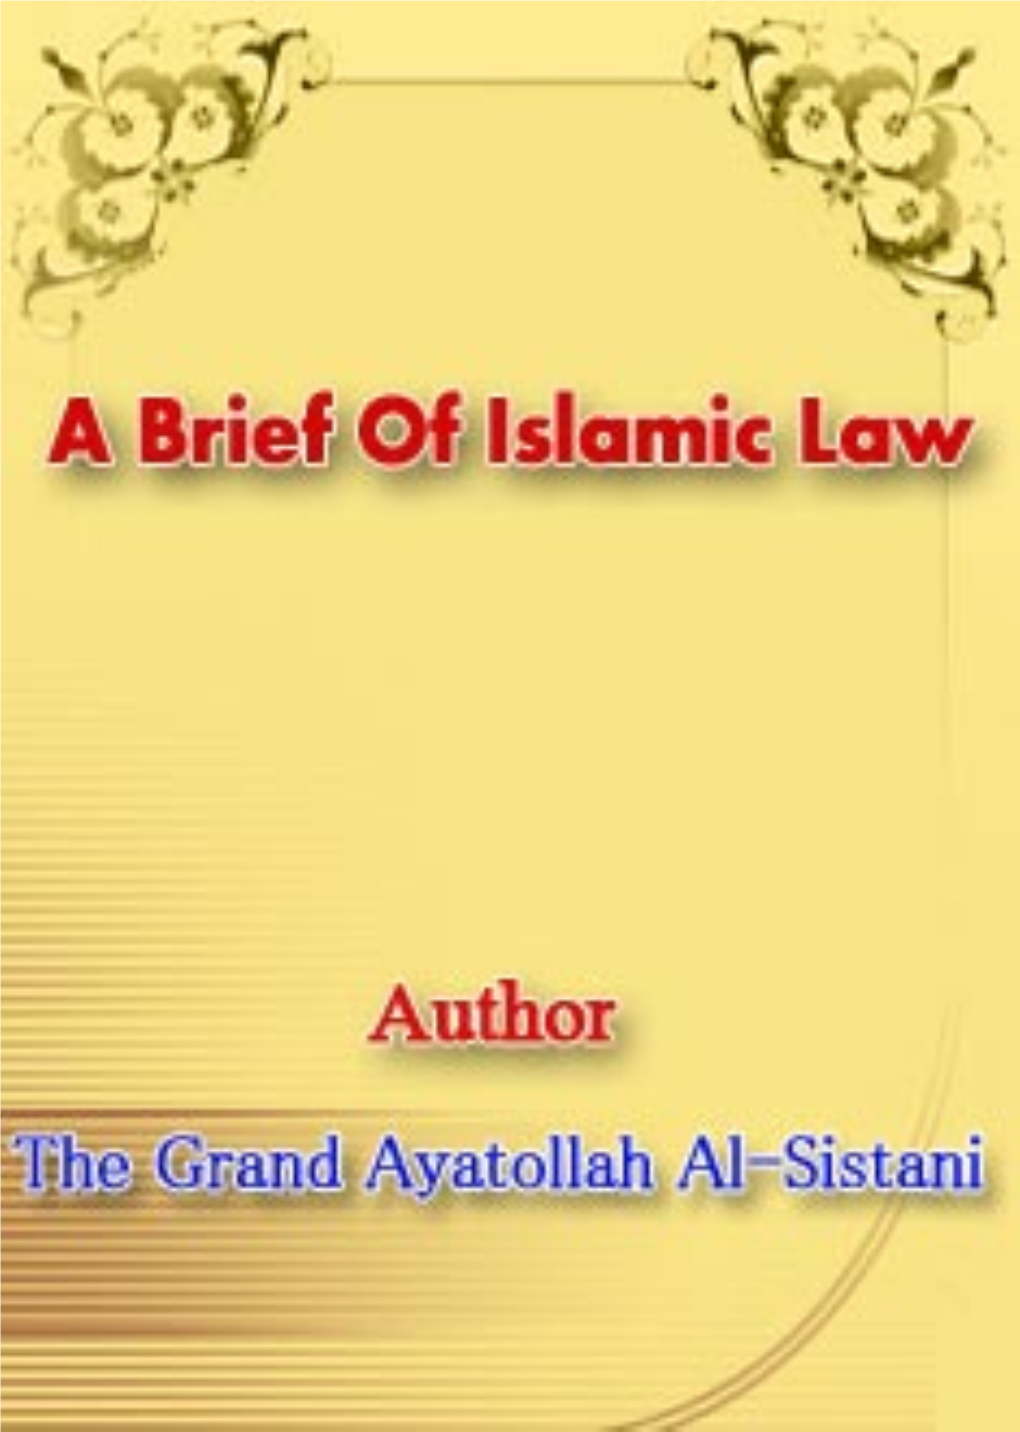 A Brief of Islamic Law Author